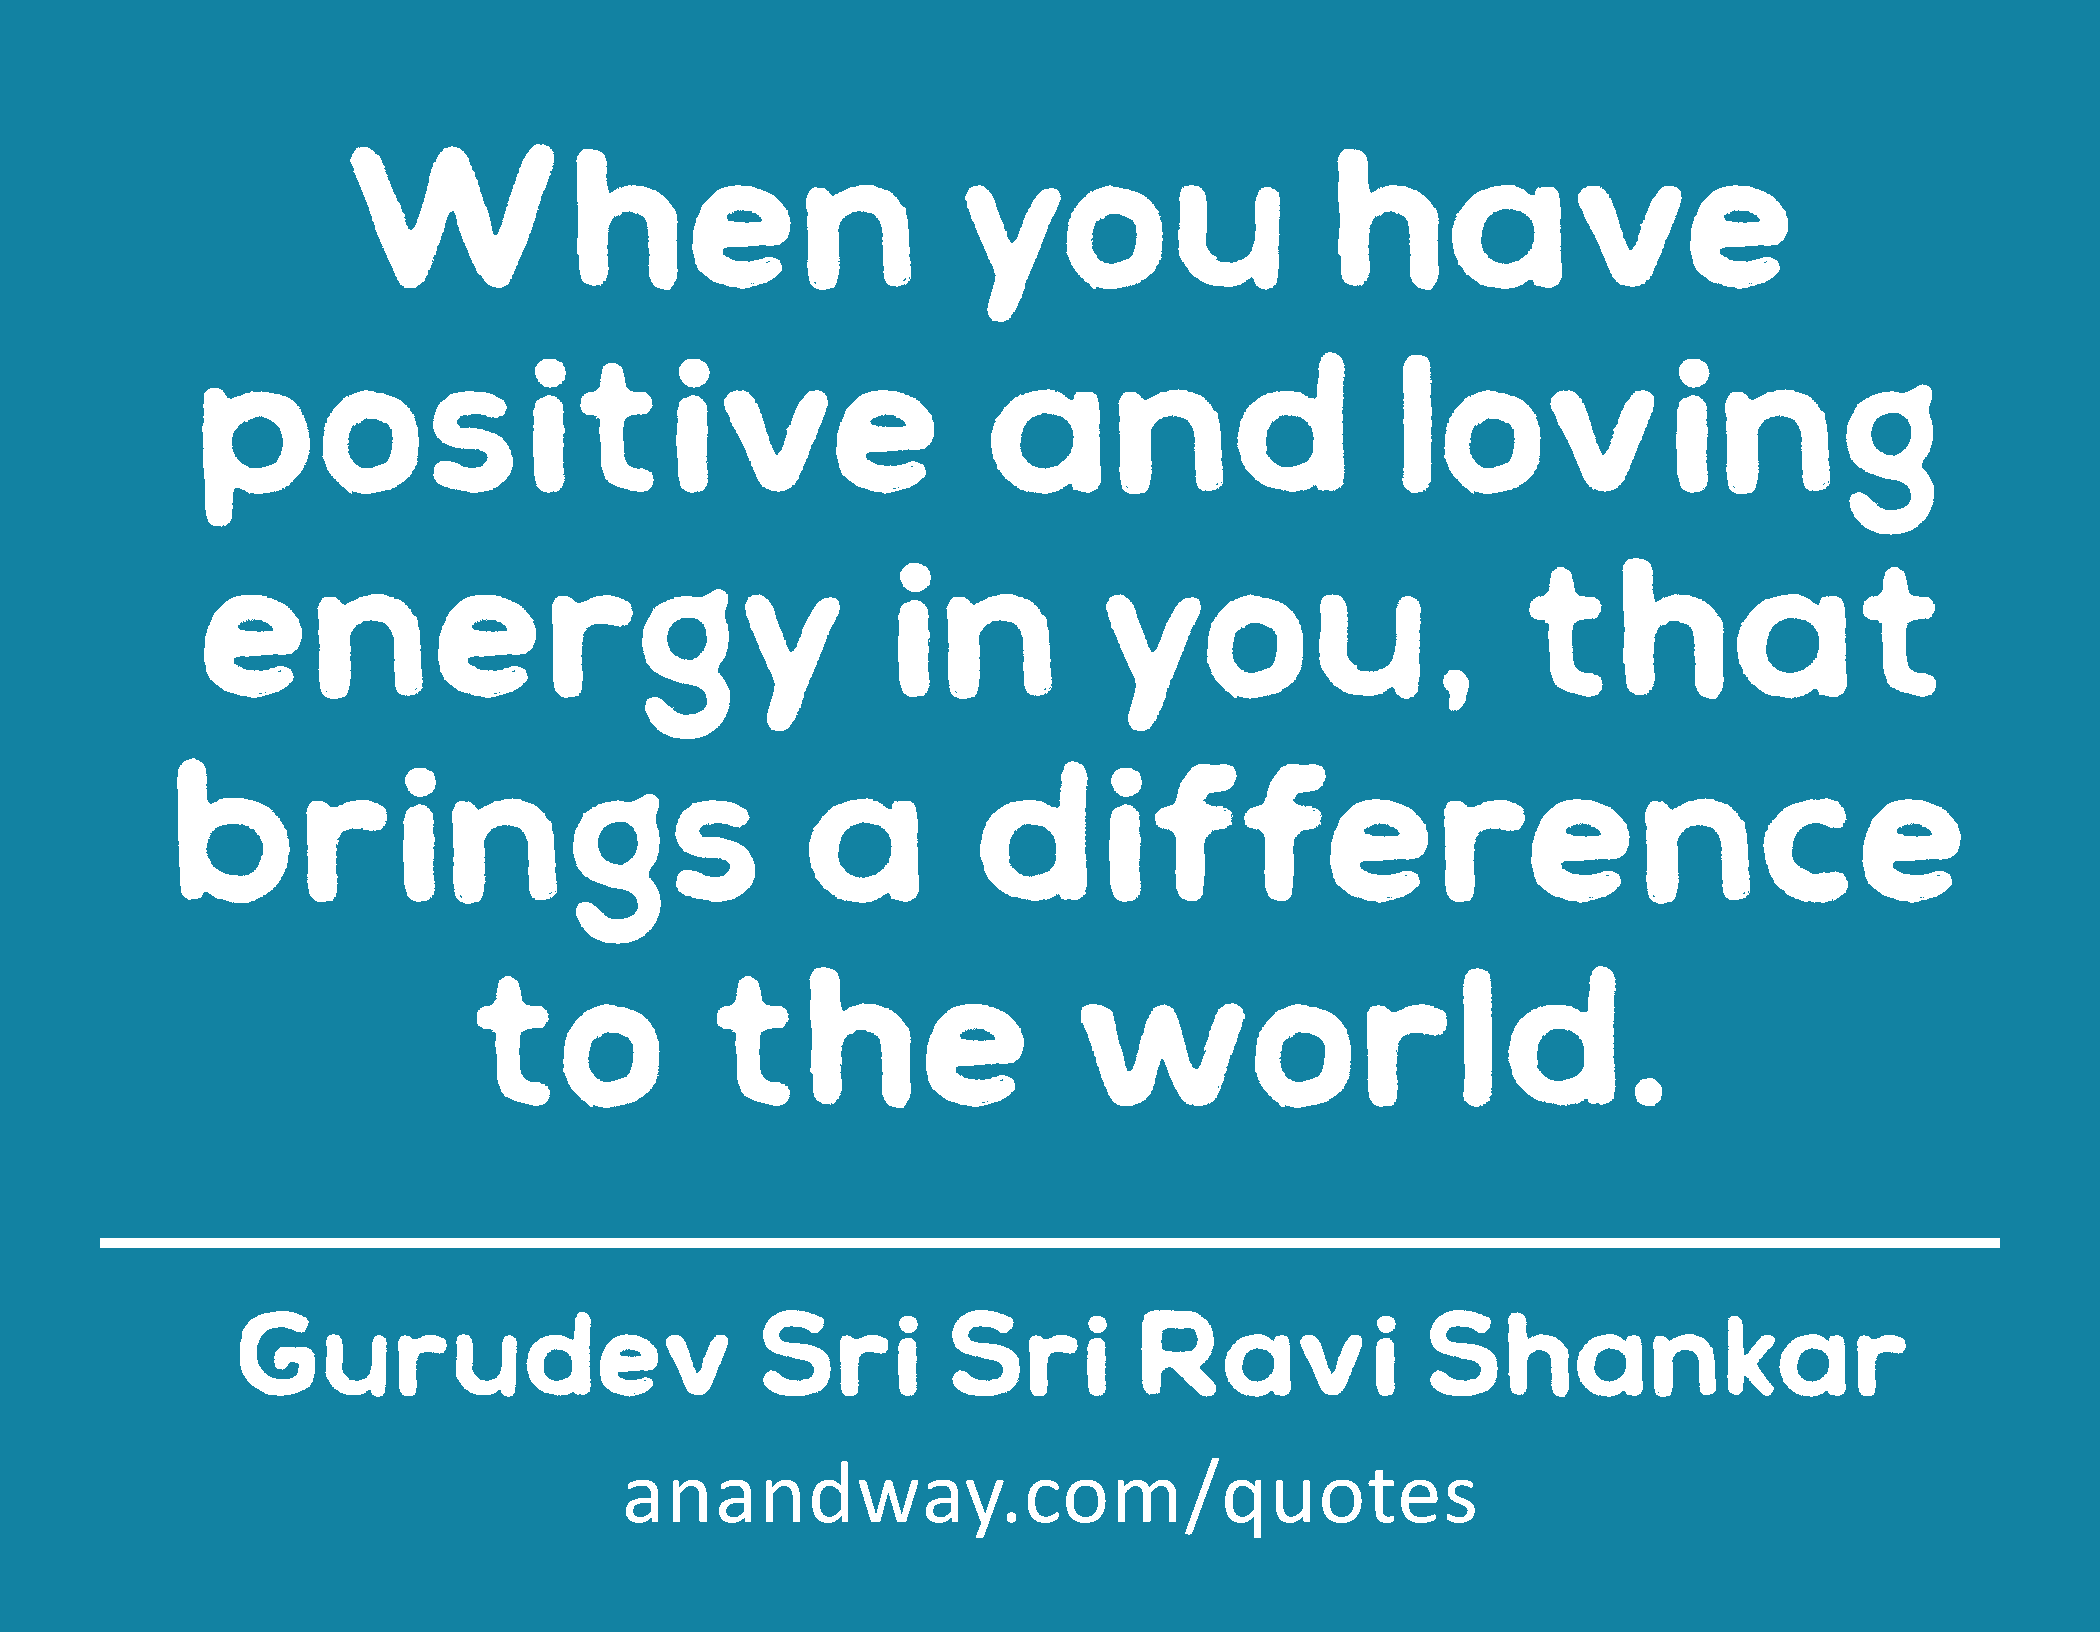 When you have positive and loving energy in you, that brings a difference to the world.
 -Gurudev Sri Sri Ravi Shankar